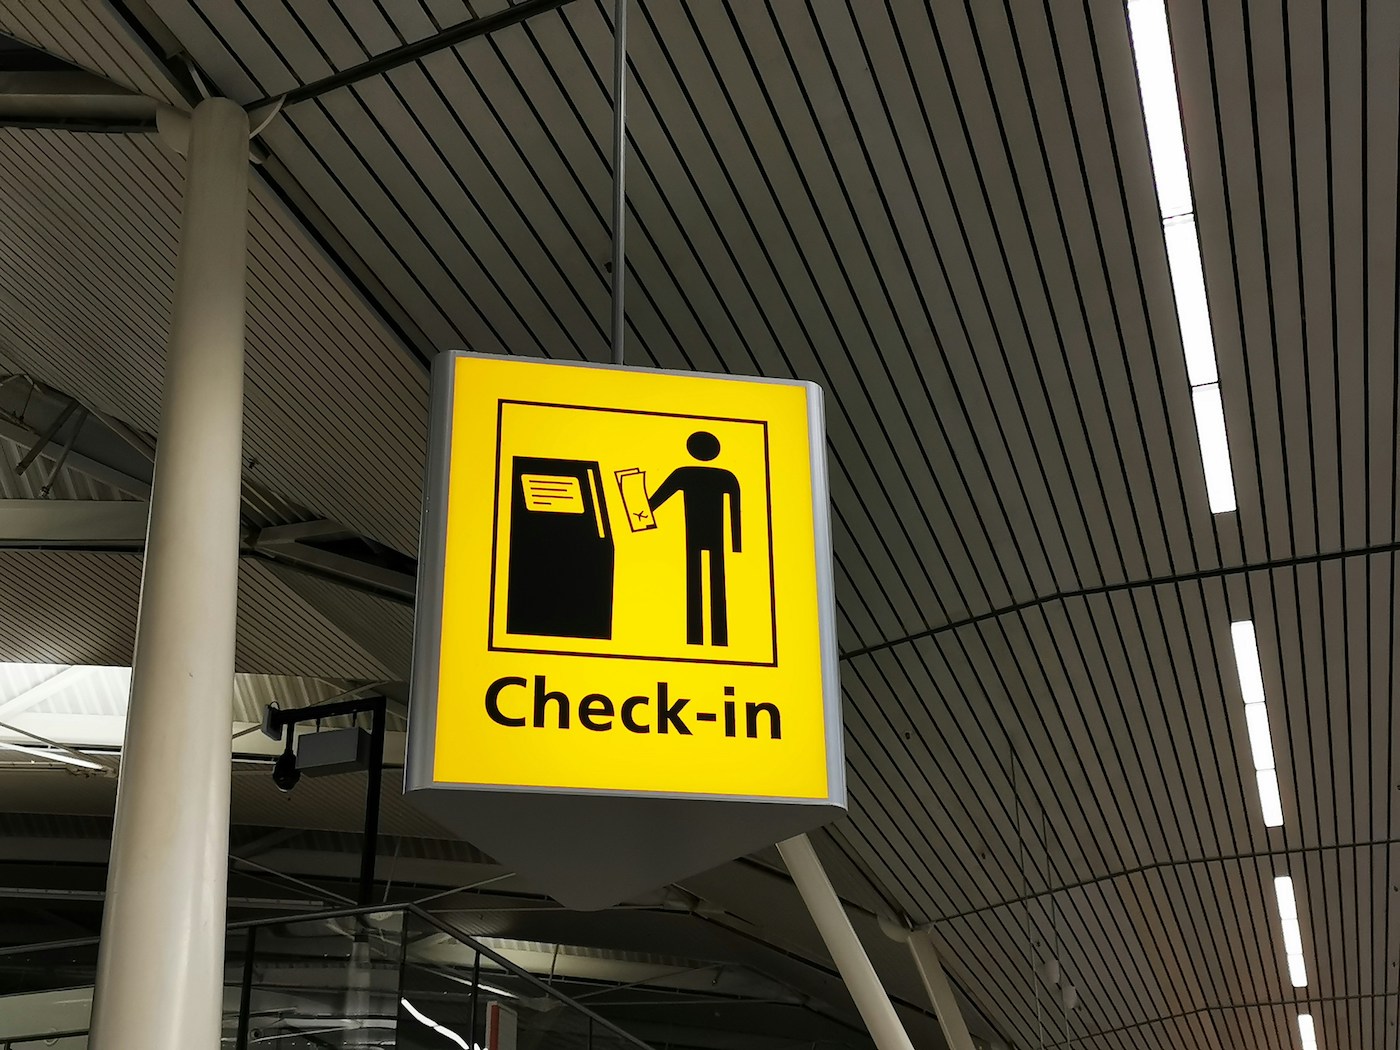 How to Check In to an Airport